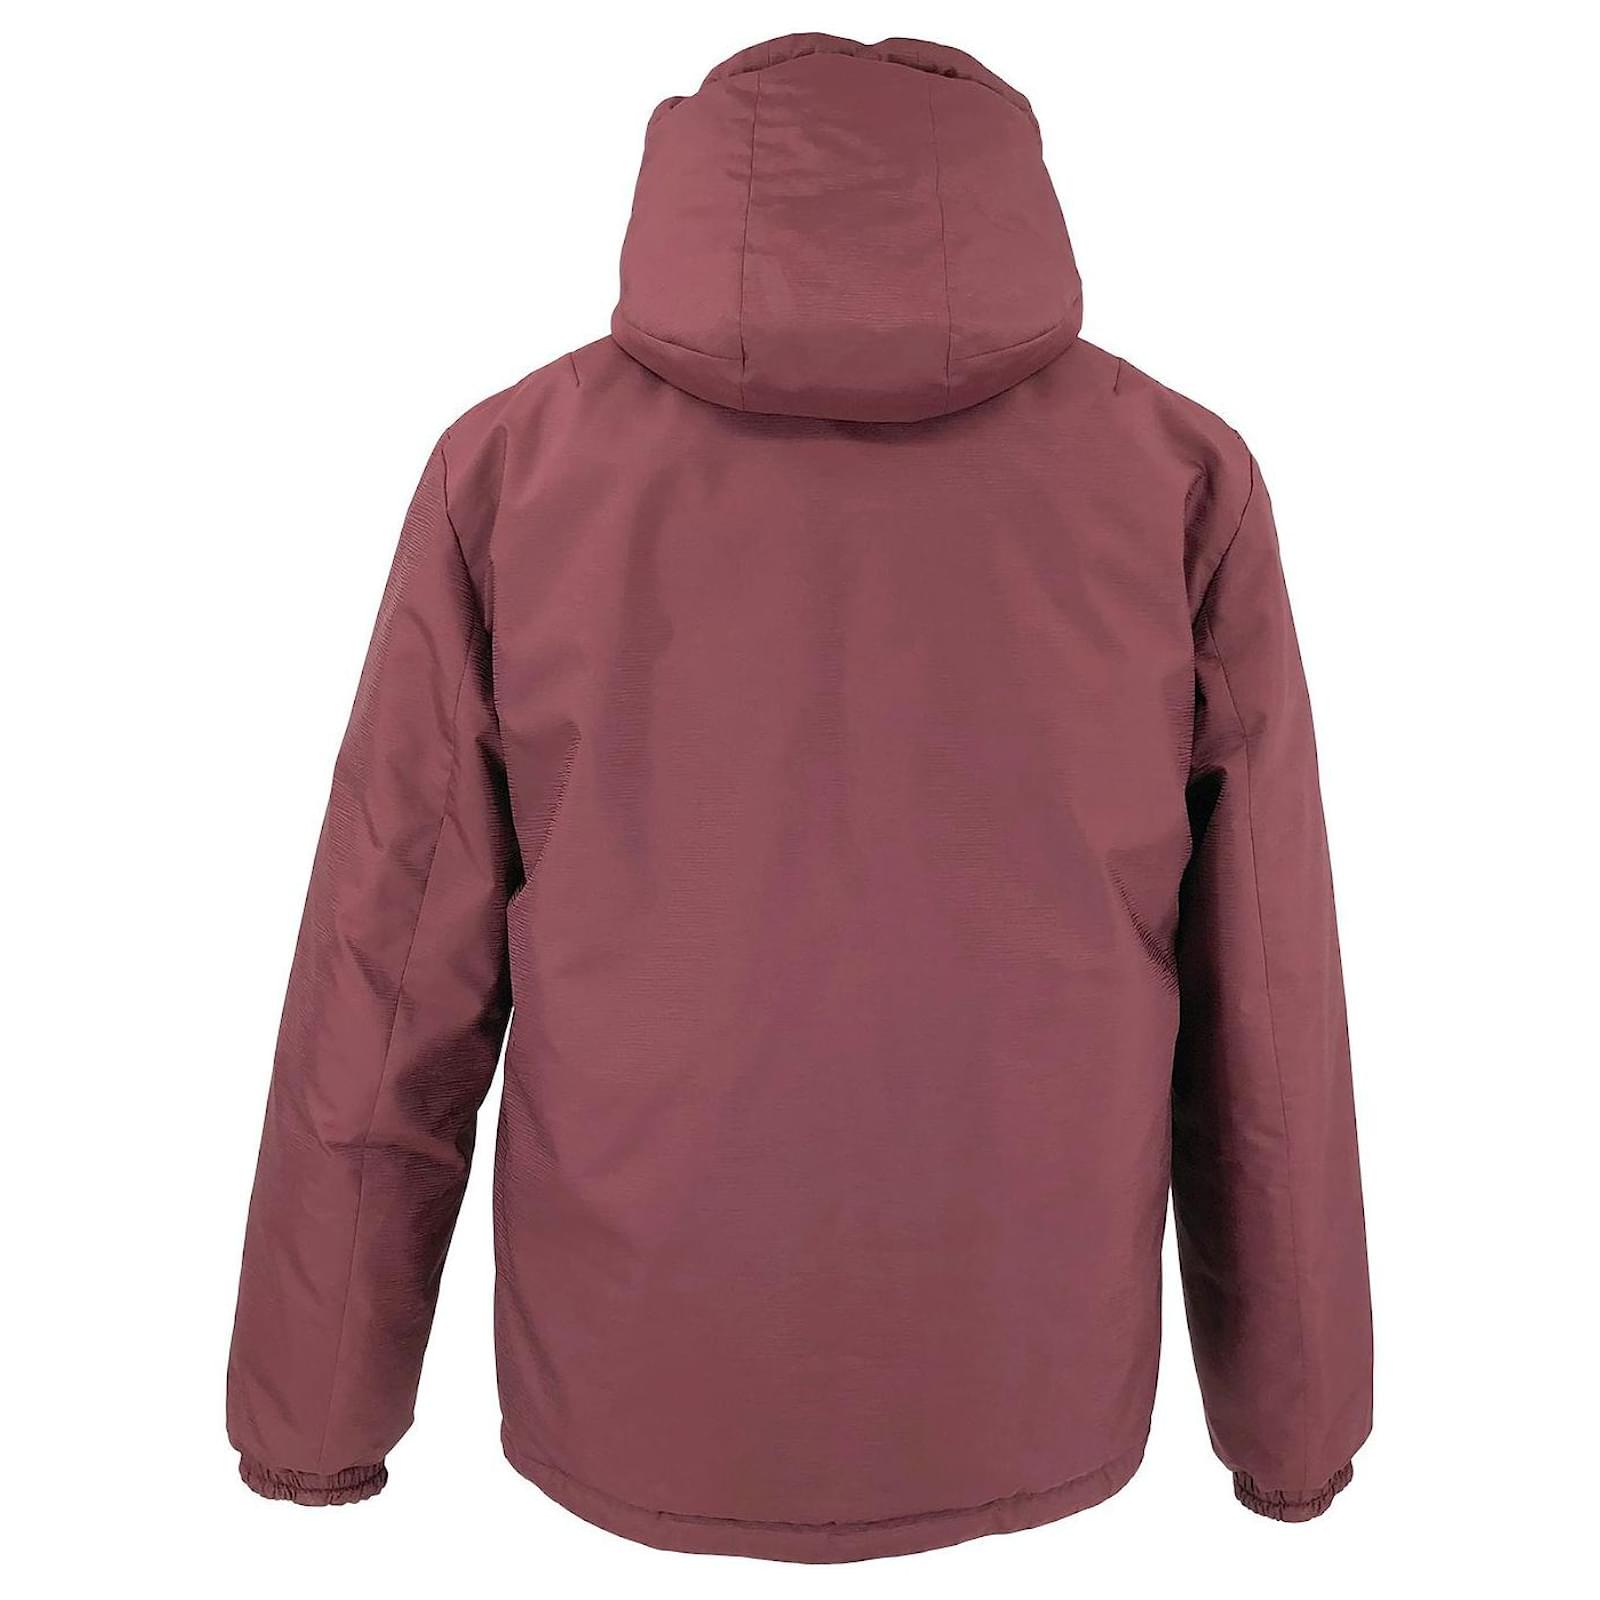 Louis Vuitton reversible padded jacket in burgundy with down